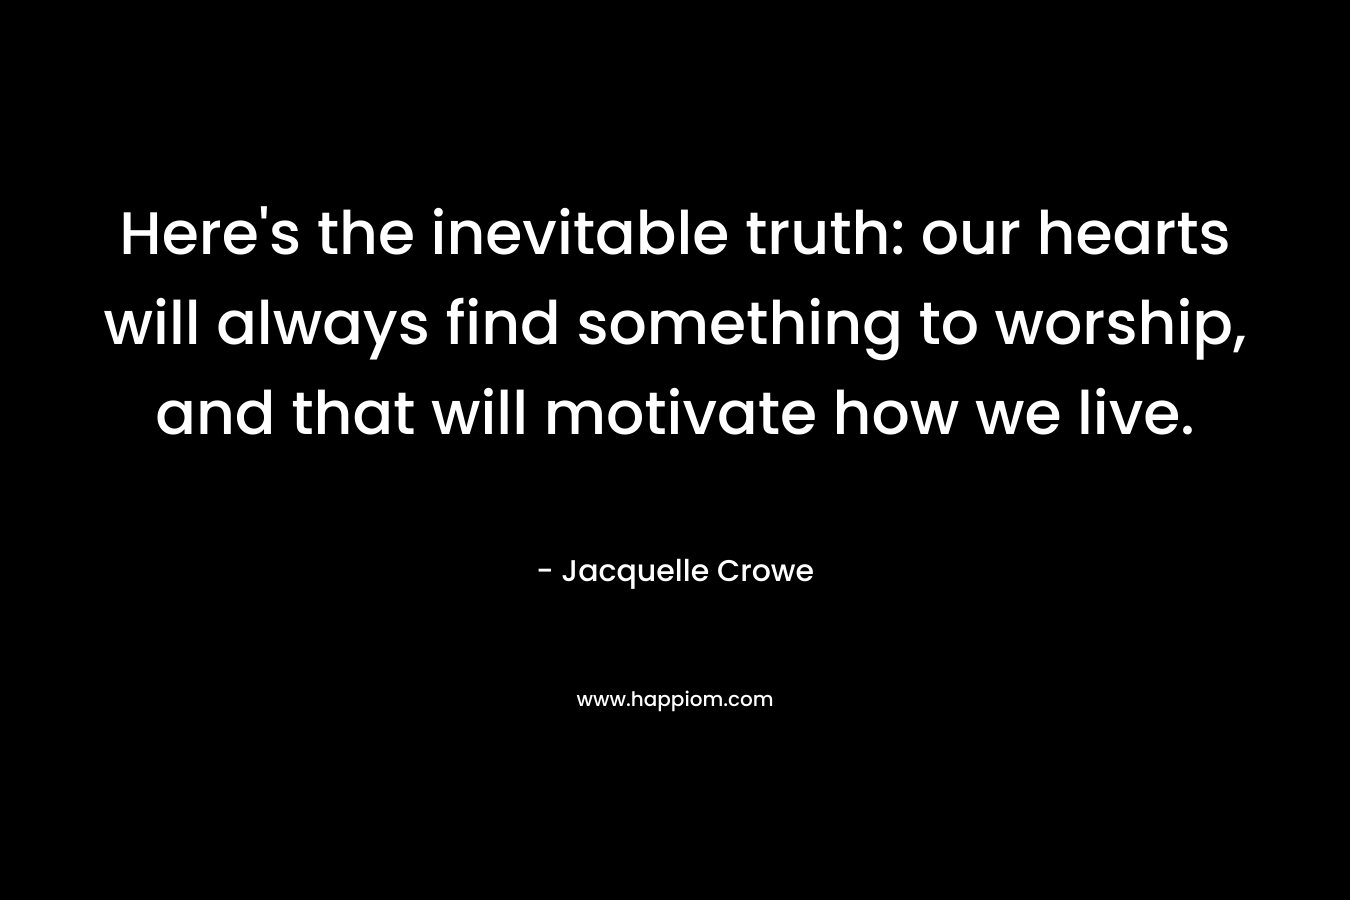 Here’s the inevitable truth: our hearts will always find something to worship, and that will motivate how we live. – Jacquelle Crowe